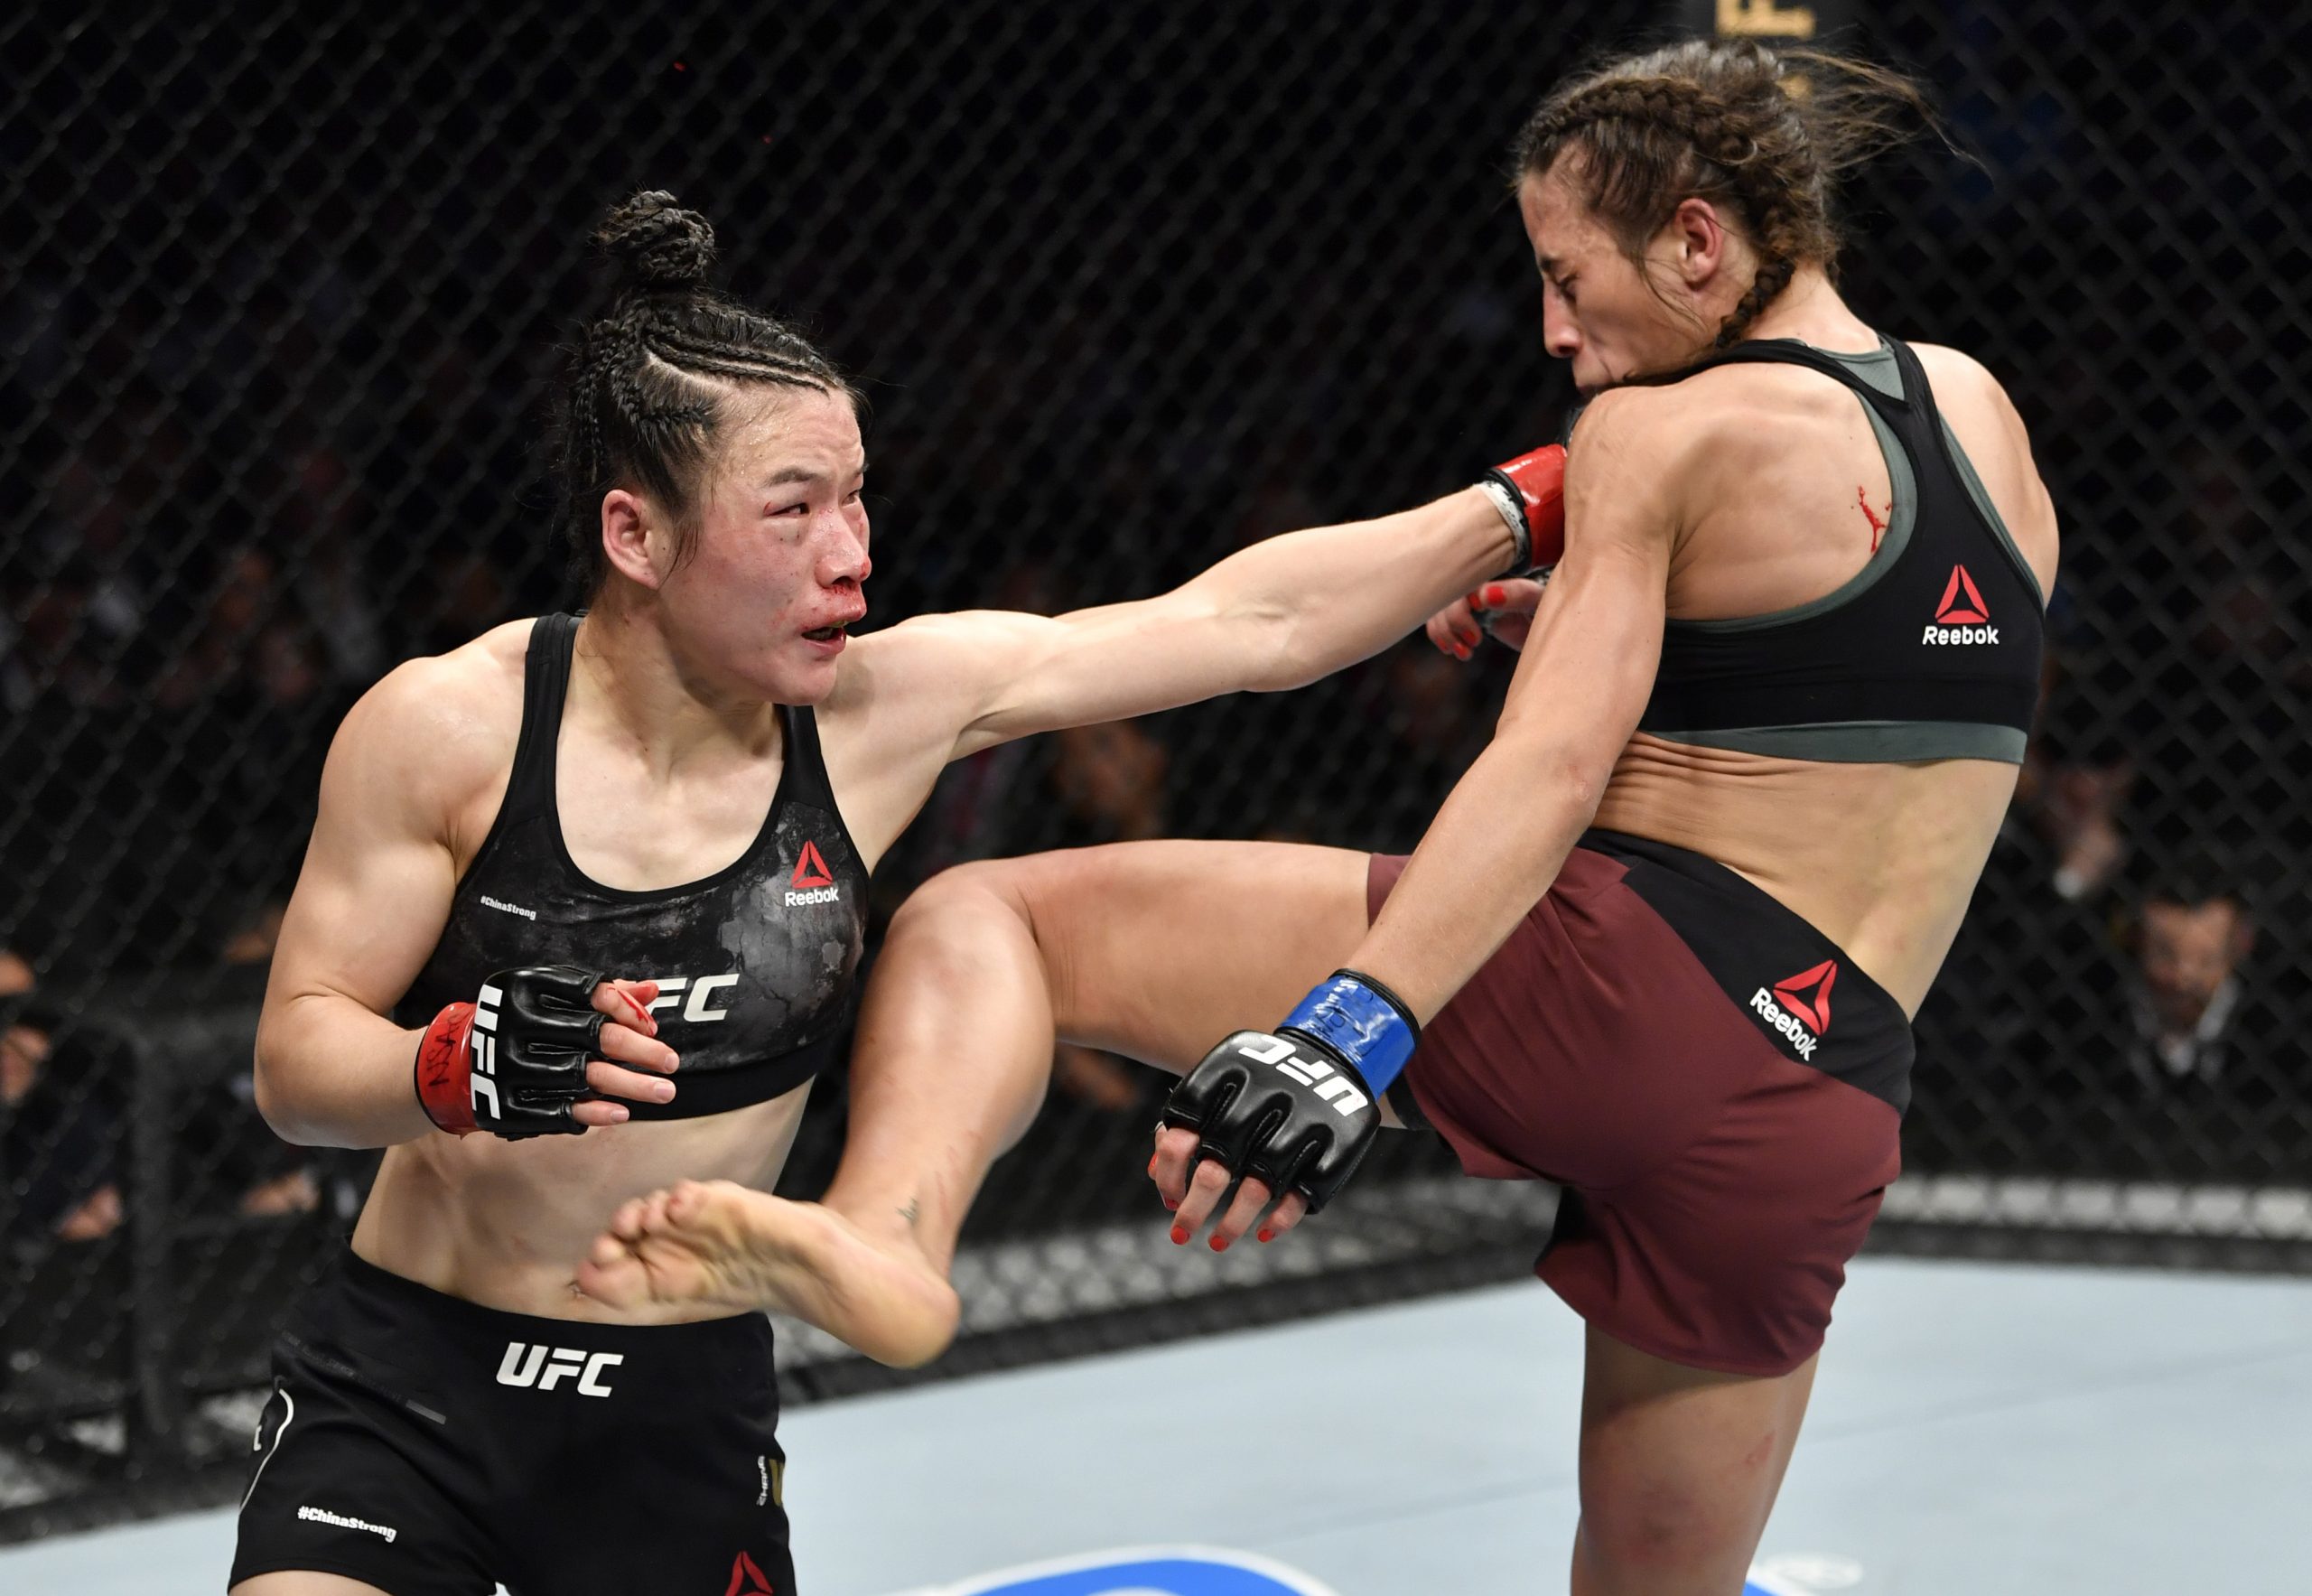 STRONG IMAGE! Joanna Jedrzejczyk has a deformed face after her battle ...